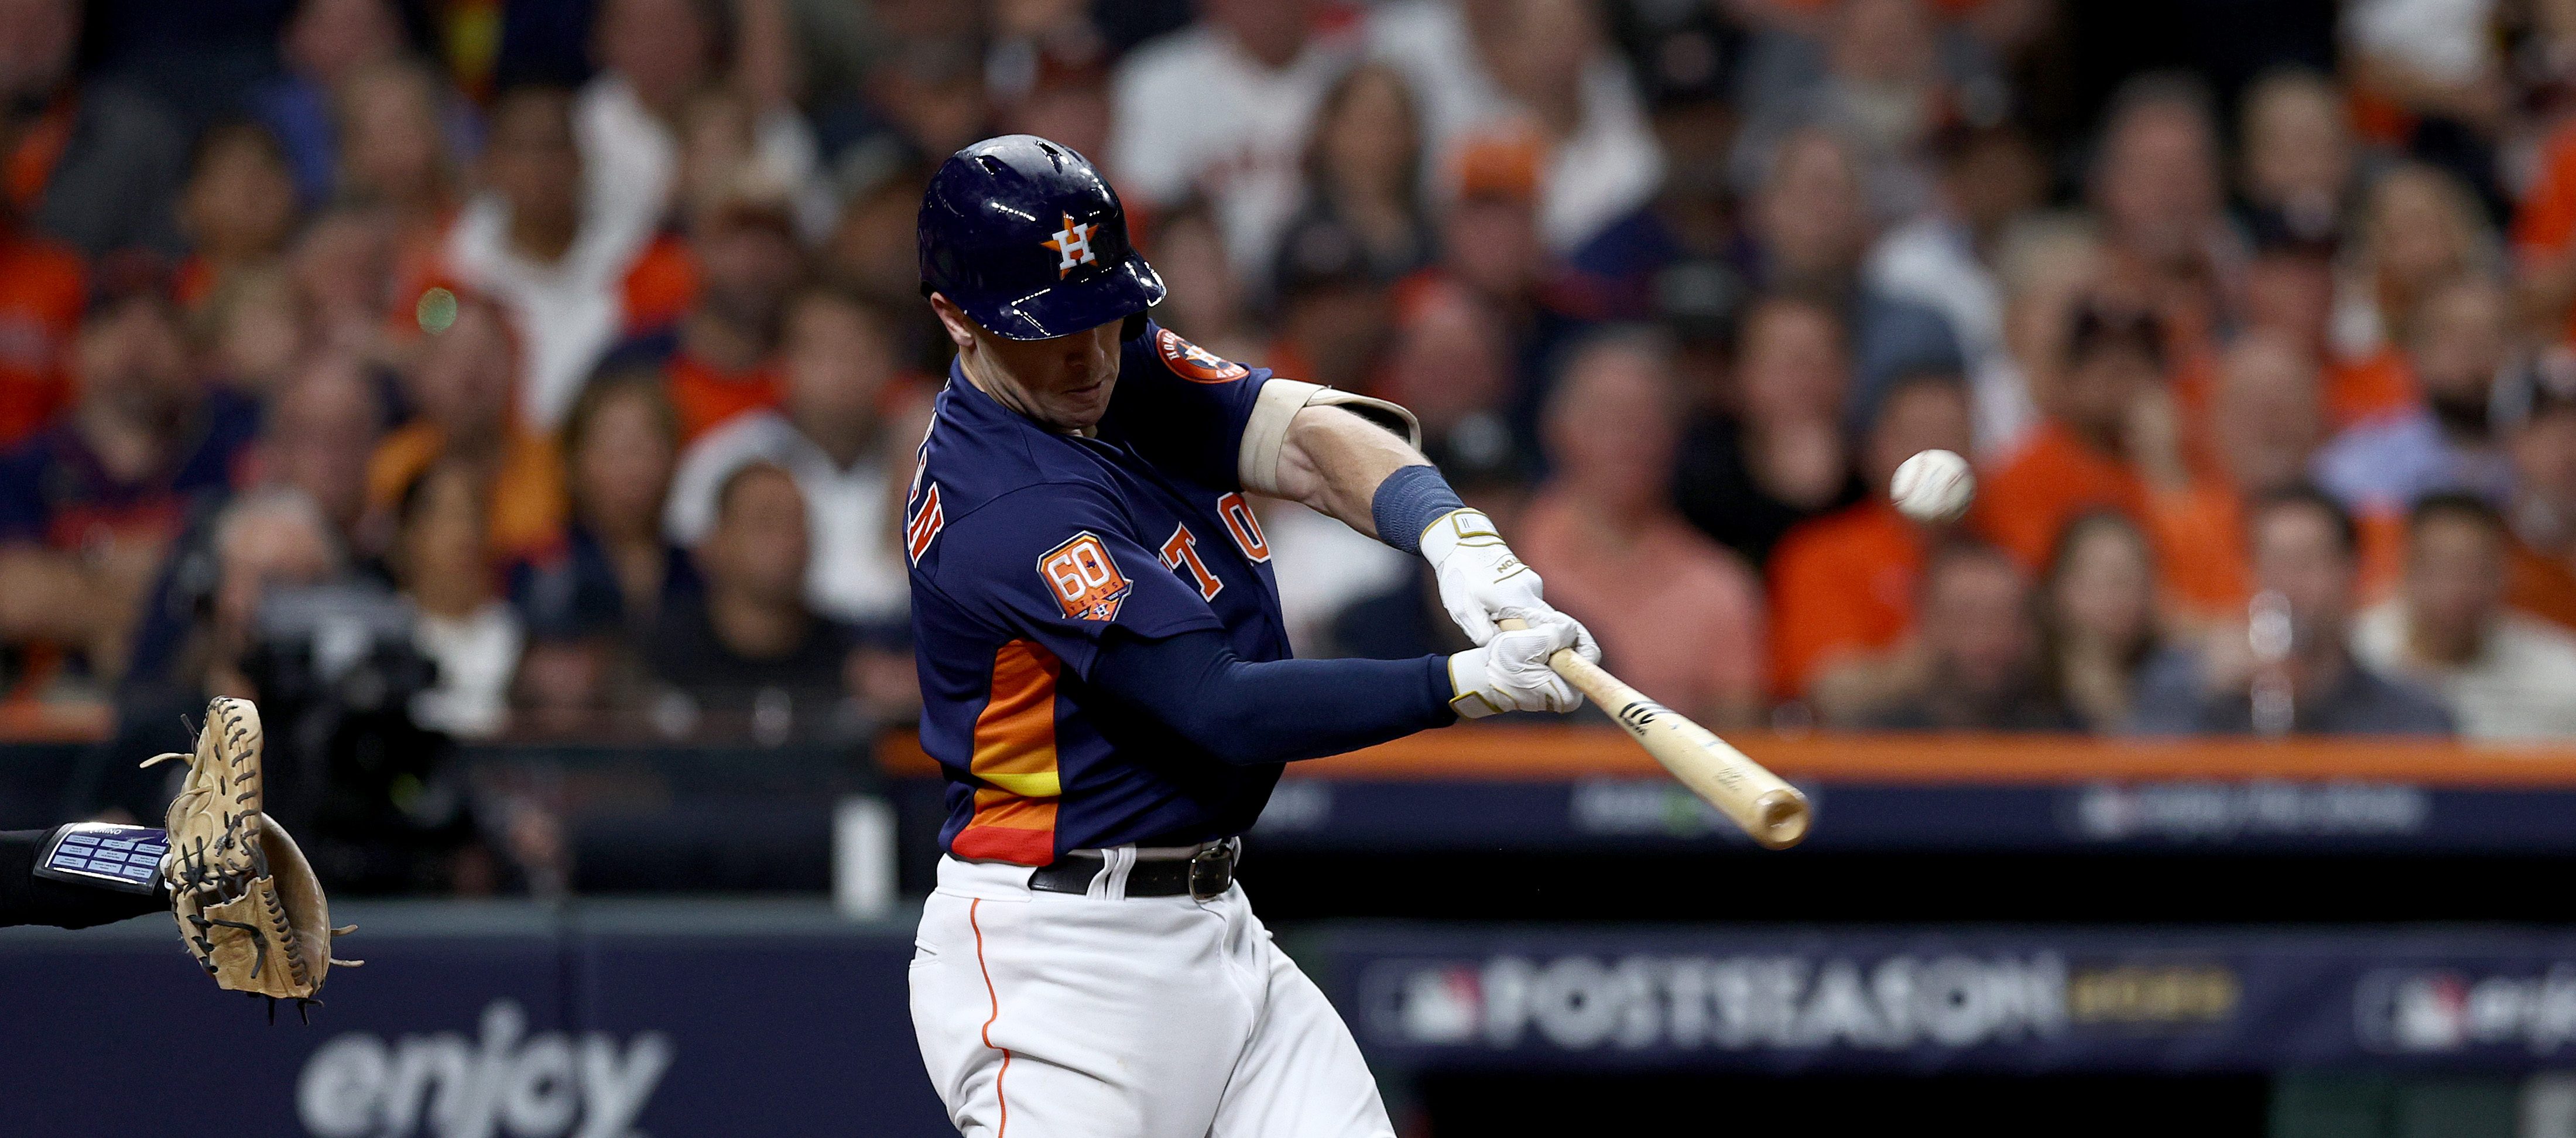 Alex Bregman #2 of the Houston Astros hits a three-run home run against the New York Yankees during the third inning in game two of the American League Championship Series at Minute Maid Park on October 20, 2022 in Houston, Texas.